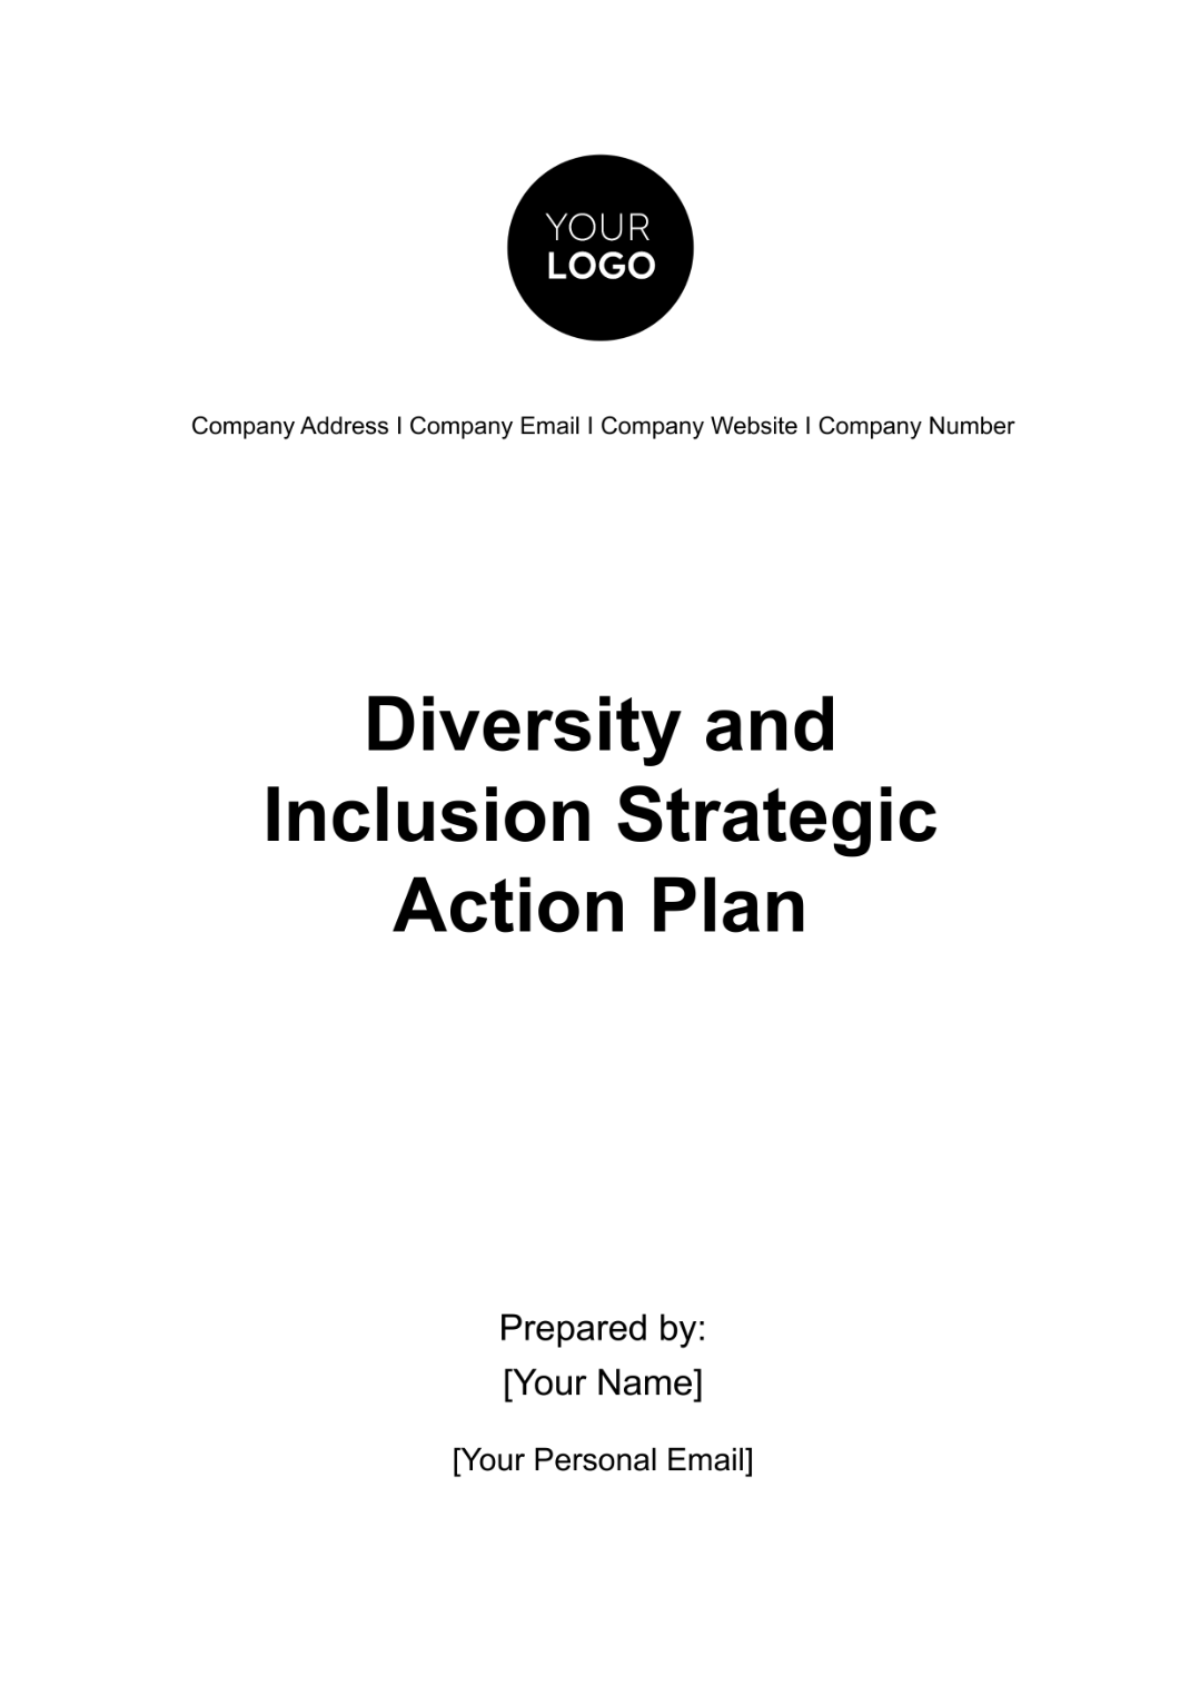 Free Diversity and Inclusion Strategic Action Plan HR Template